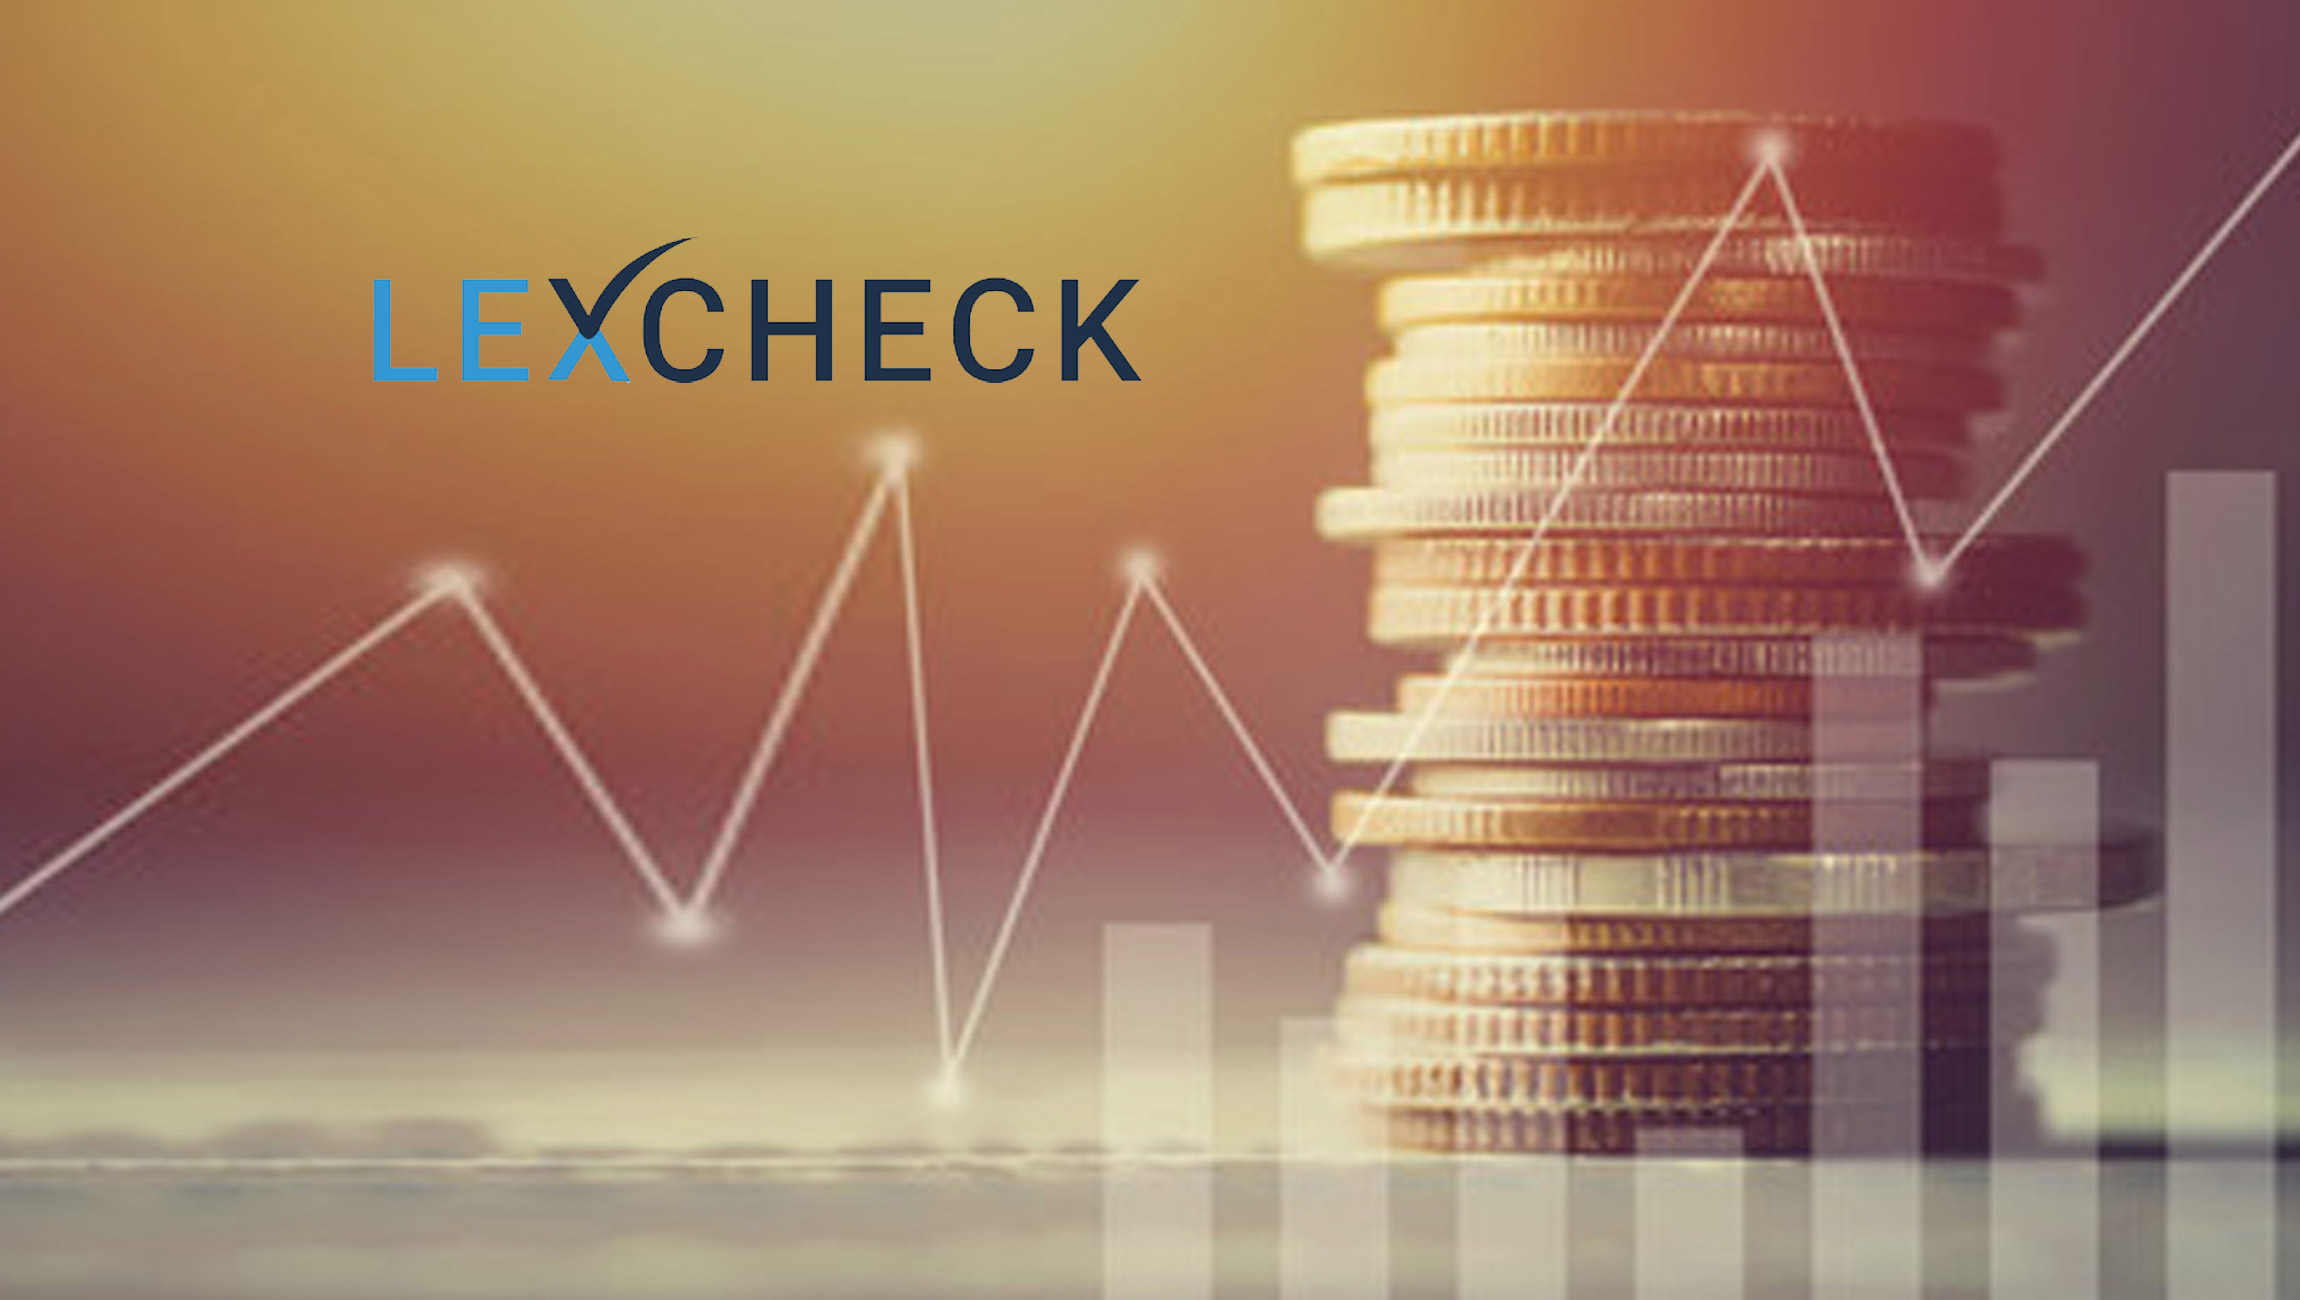 LexCheck Secures $17M Series A Led By Mayfield Fund